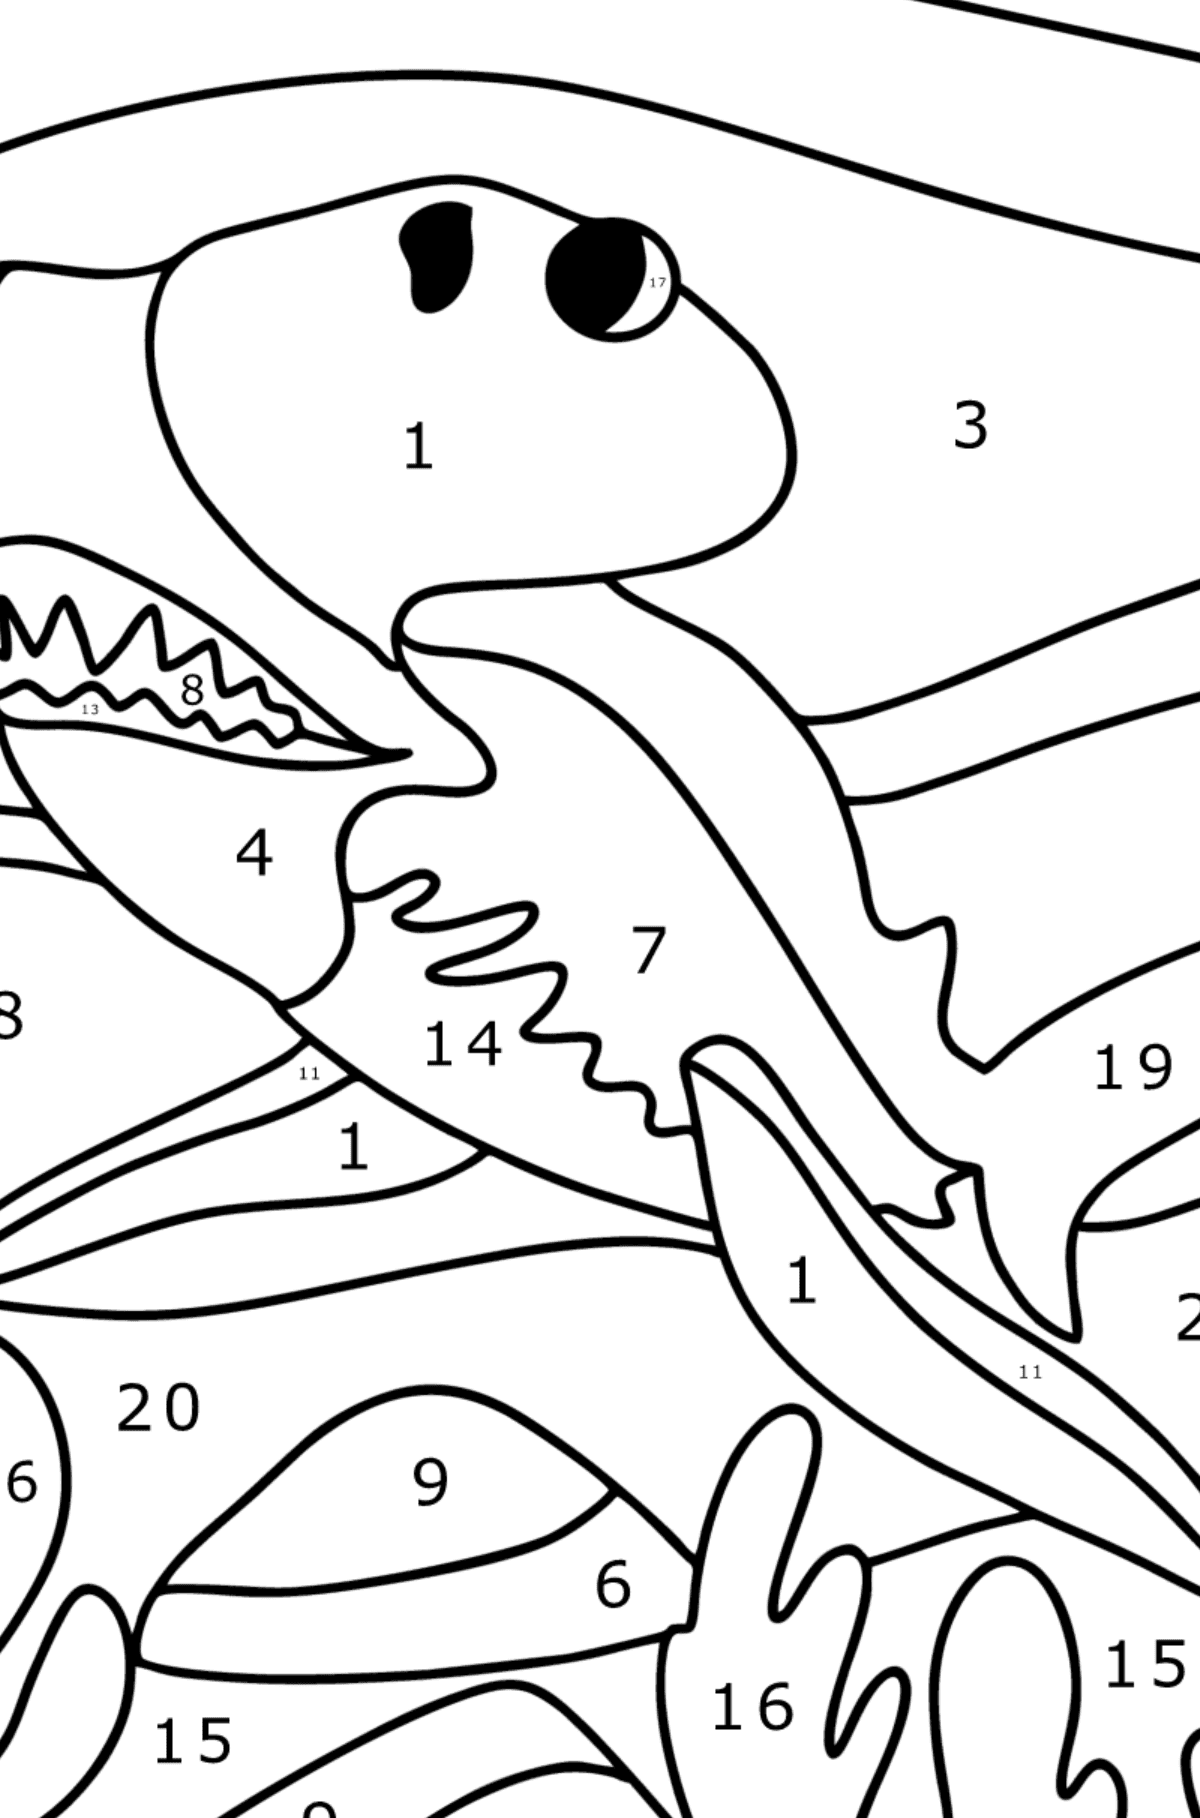 Hammerhead shark coloring page - Coloring by Numbers for Kids